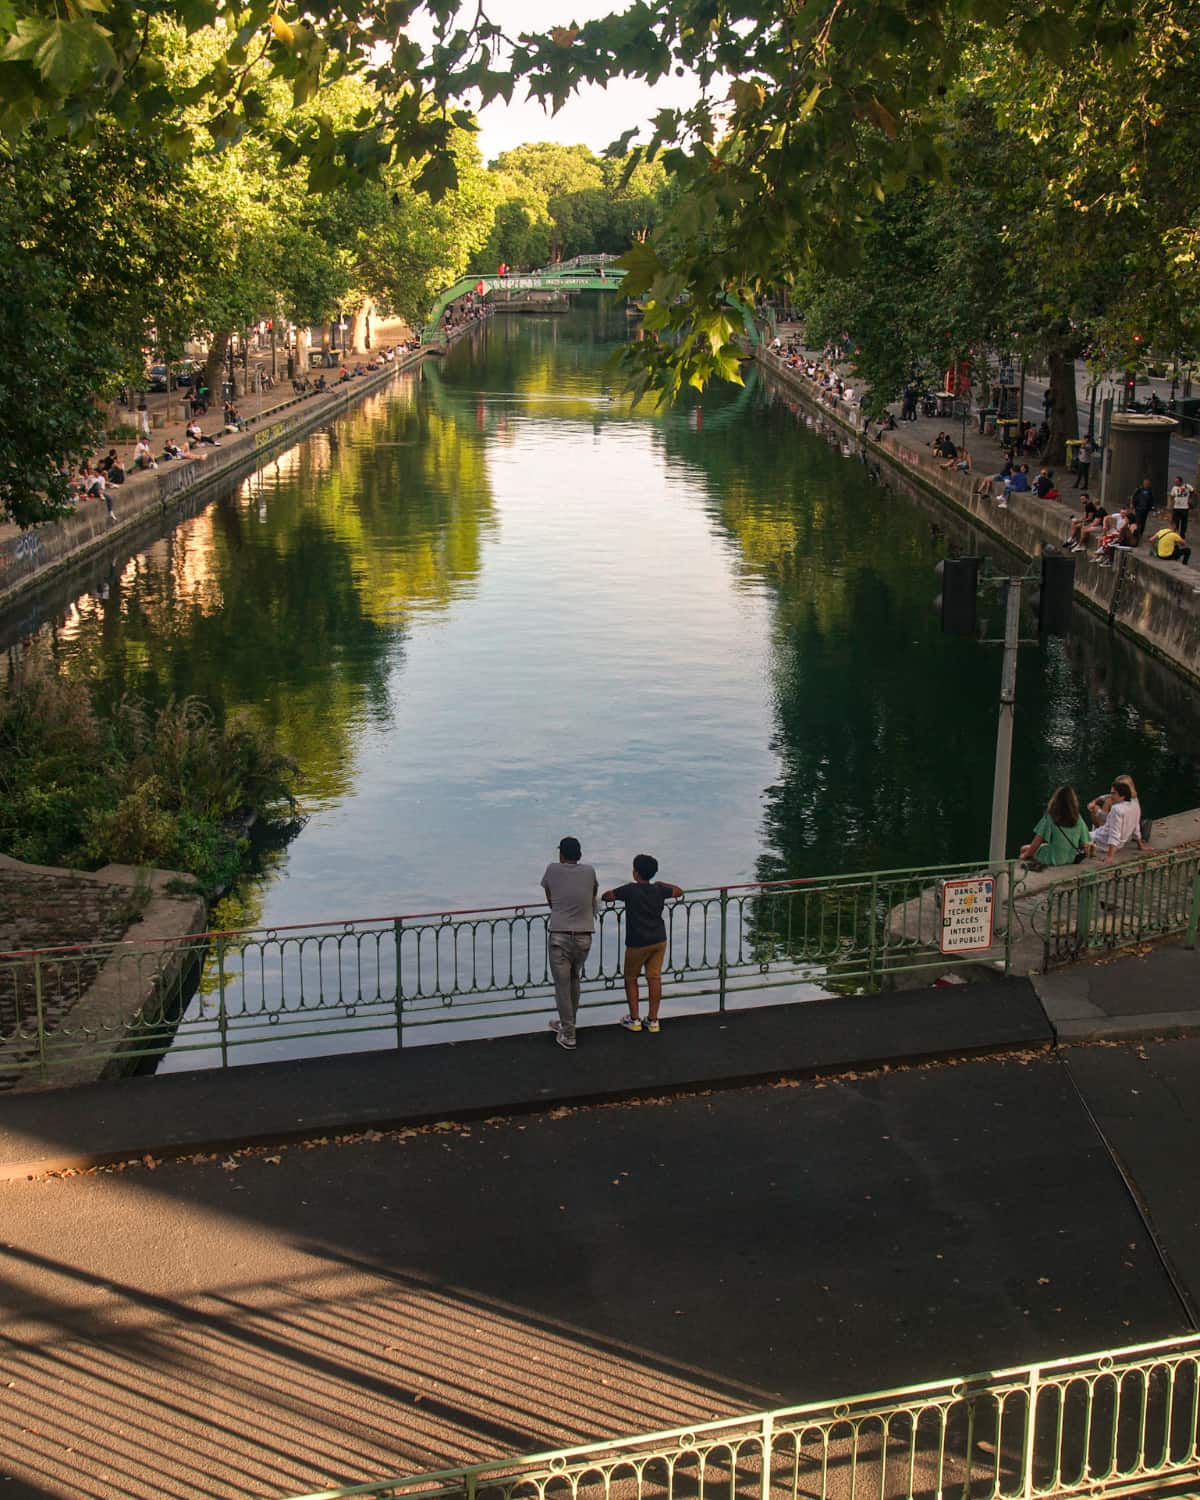 A father and son enjoying the sight at Canal Saint Martin, Paris